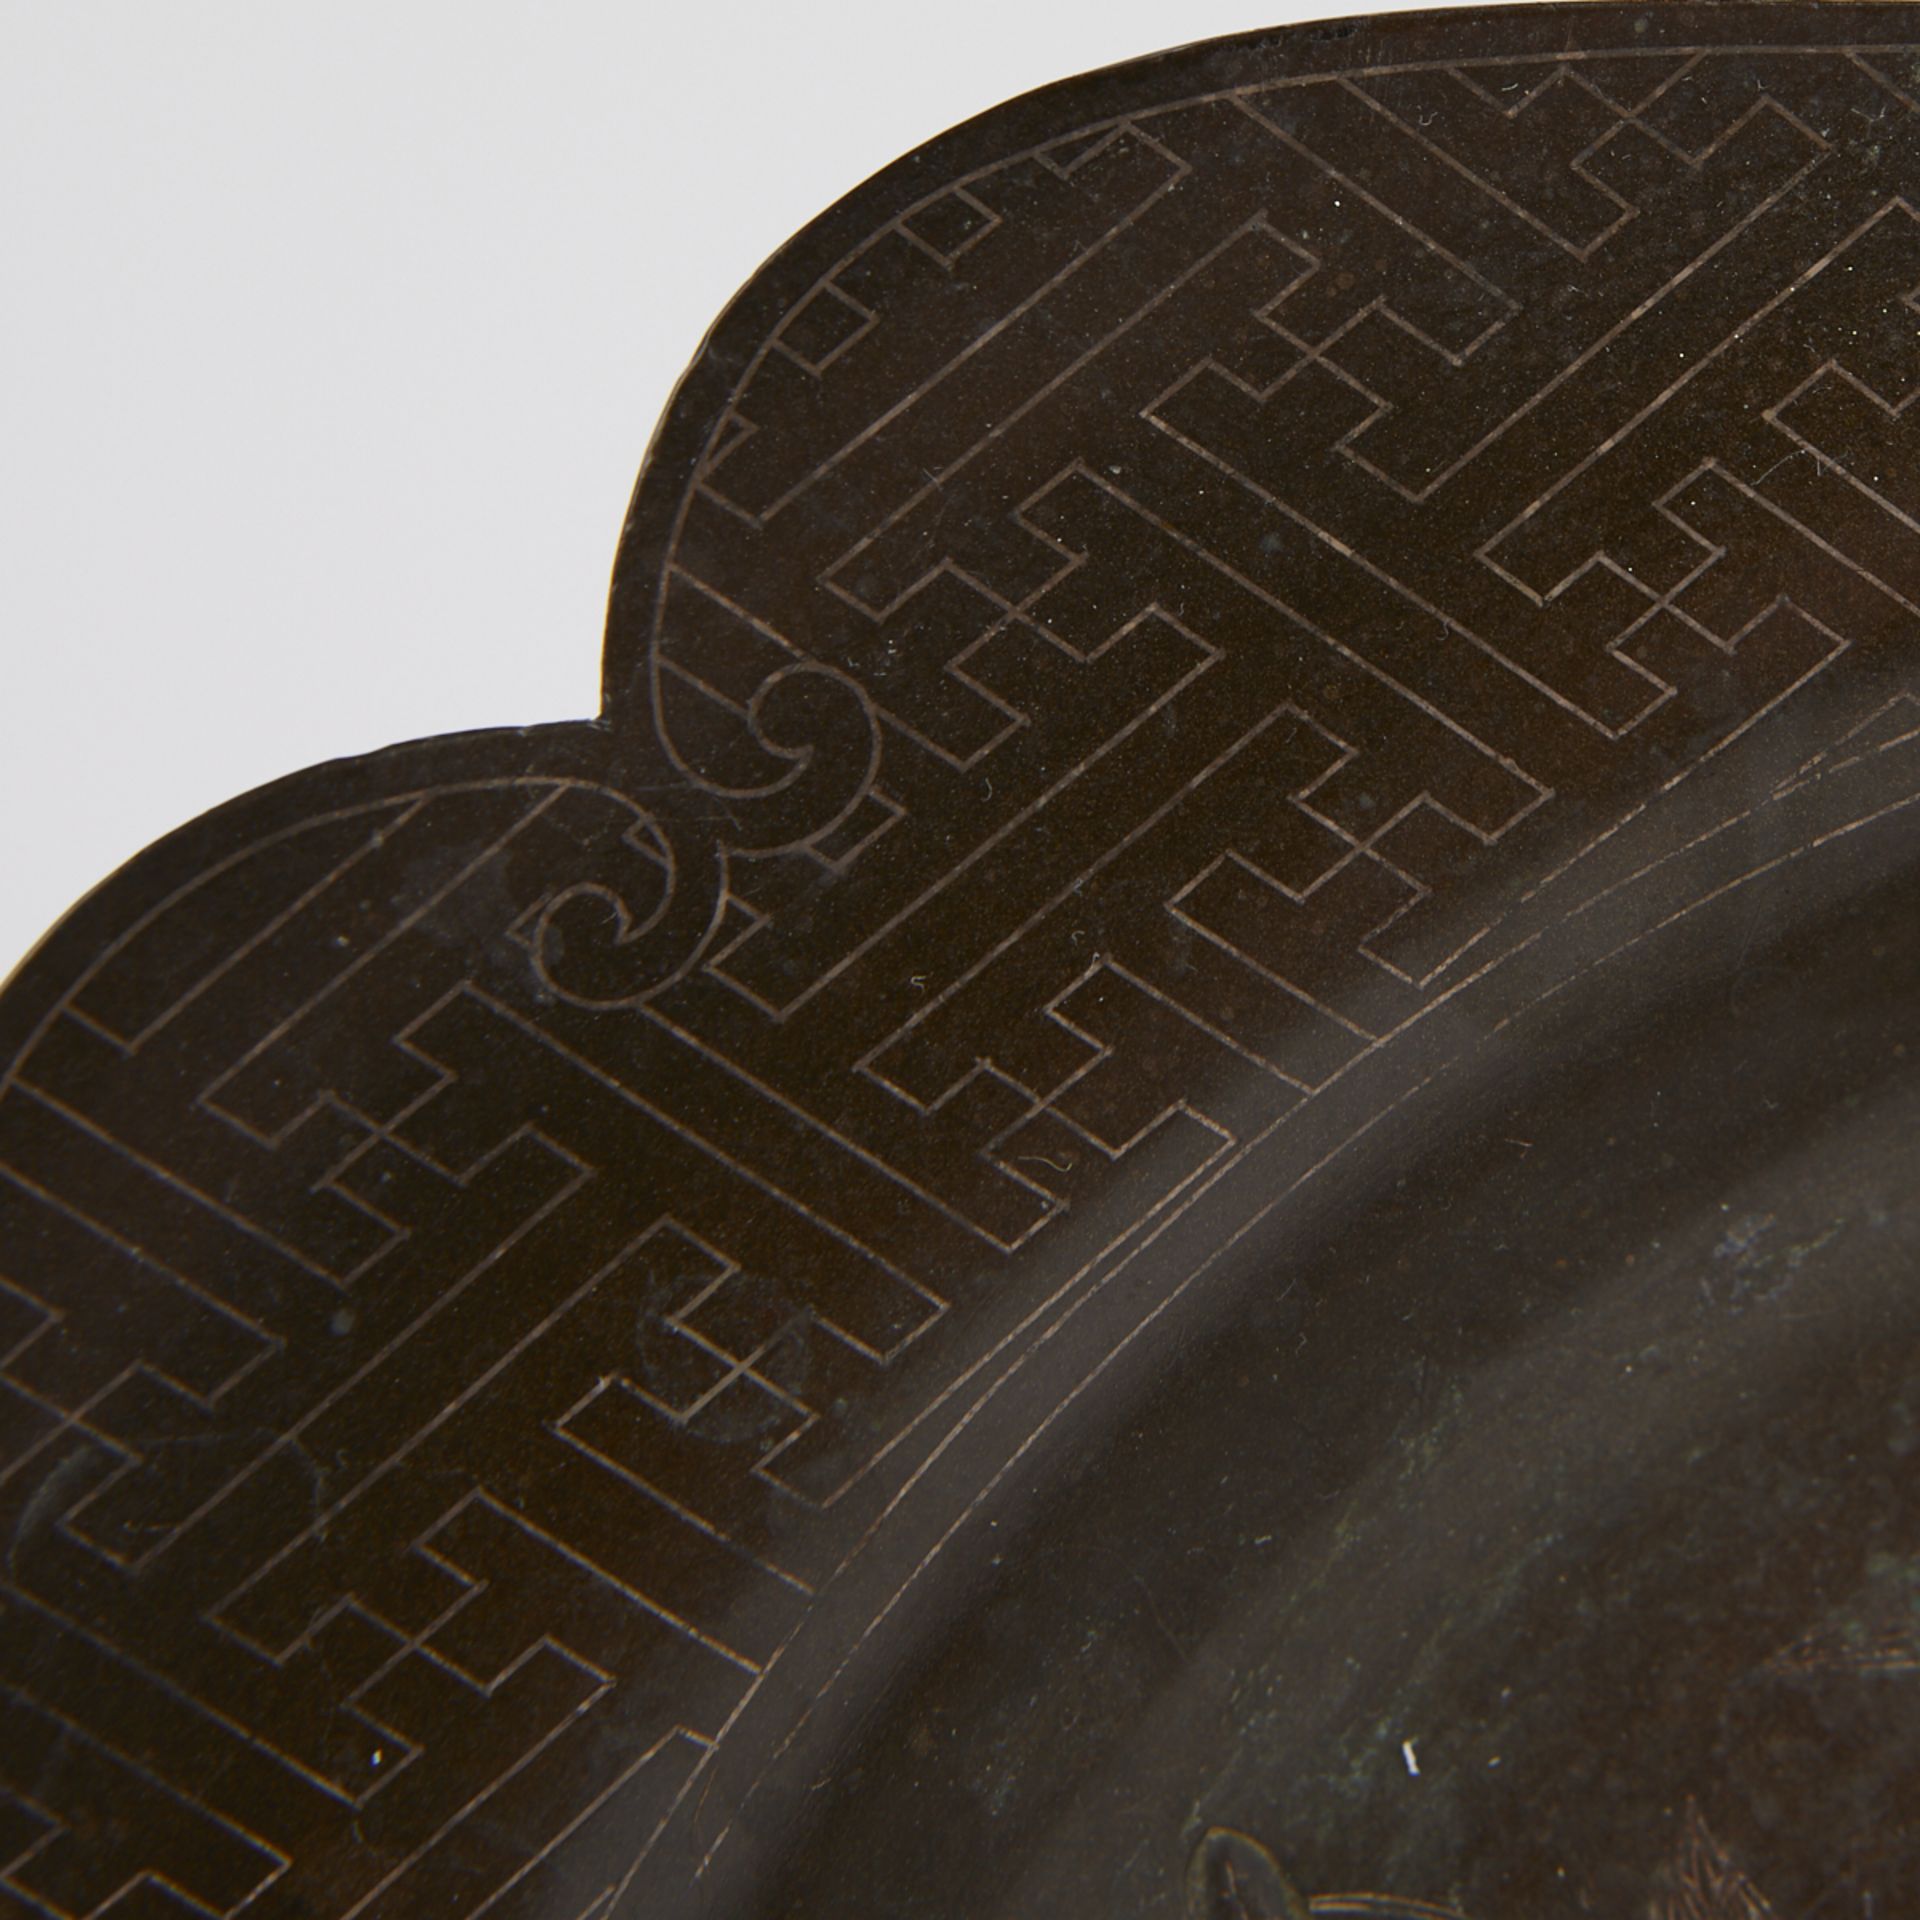 Pair of Chinese Bronze Gold & Silver Inlay Plates - Image 8 of 8